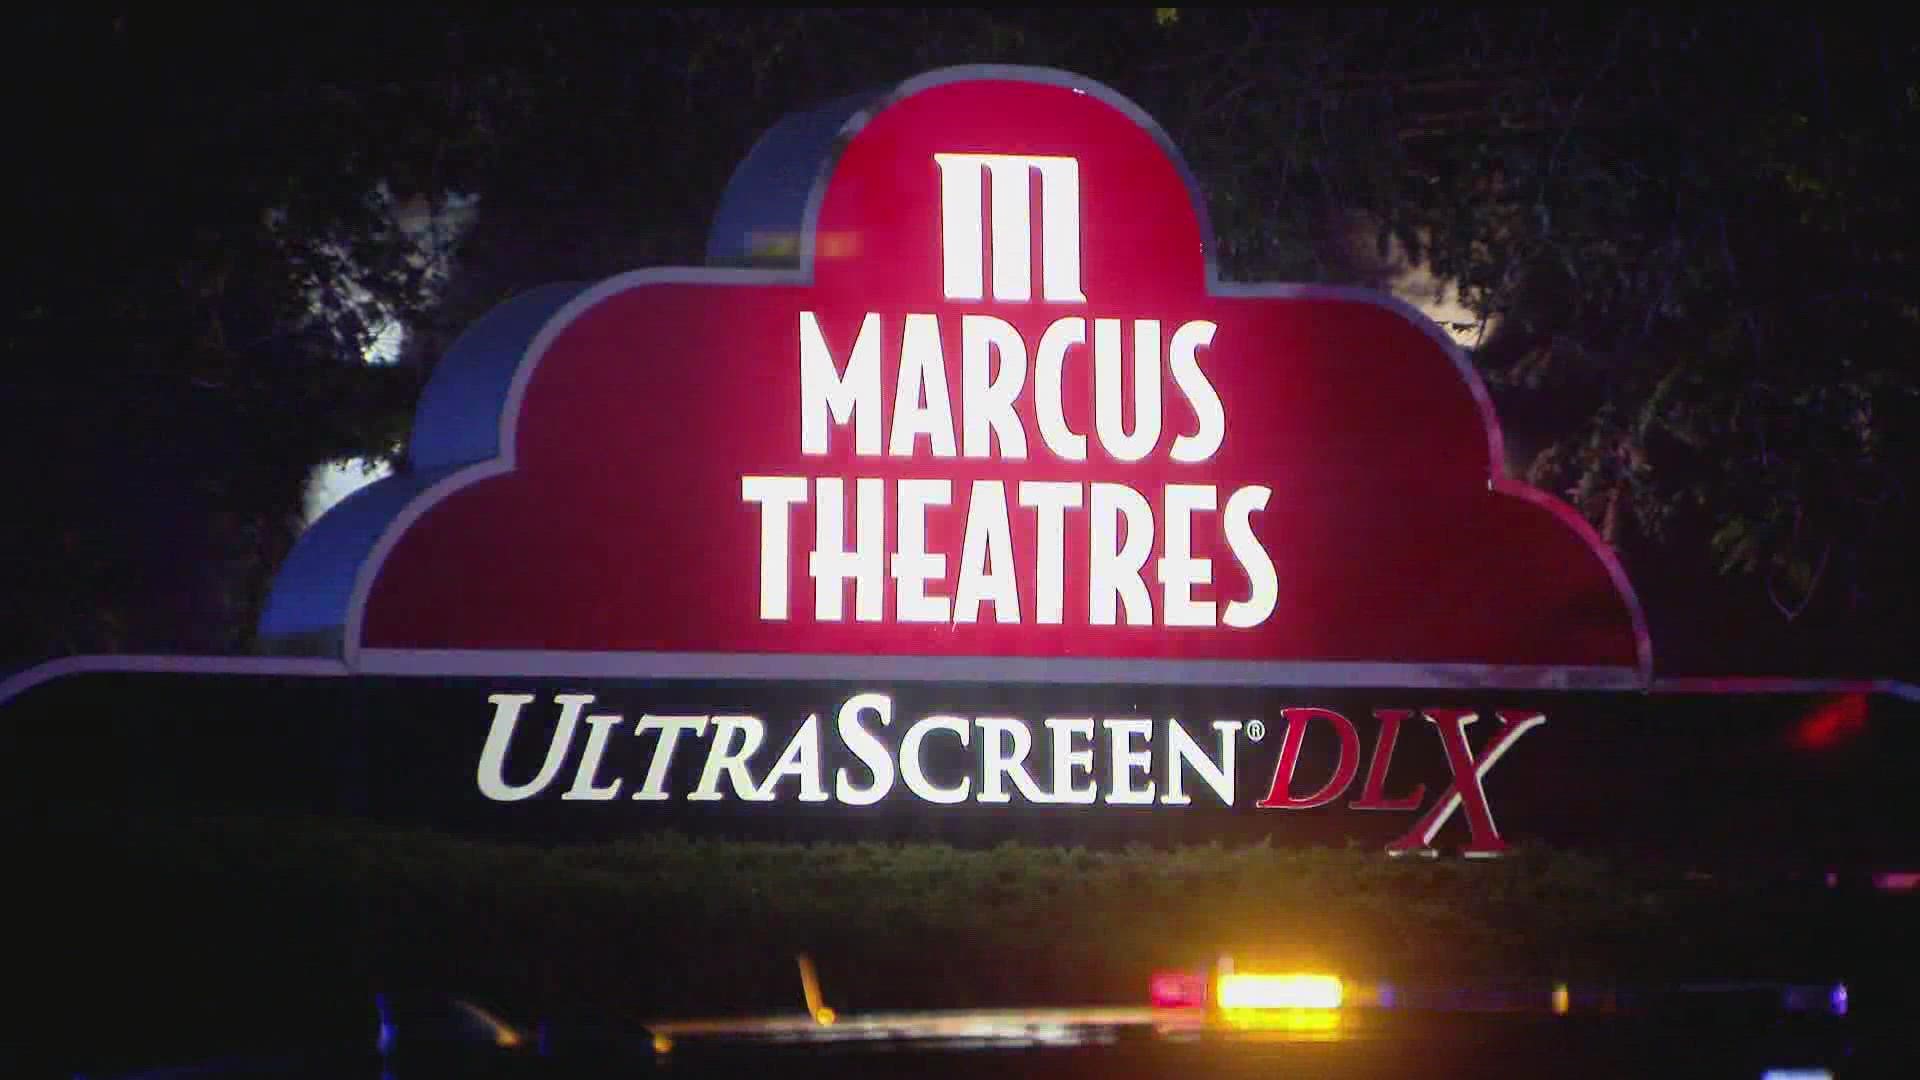 Officers responding to reports of a shooting found a 23-year-old man from Hugo wounded inside the Marcus Cinema. He underwent surgery and is expected to survive.